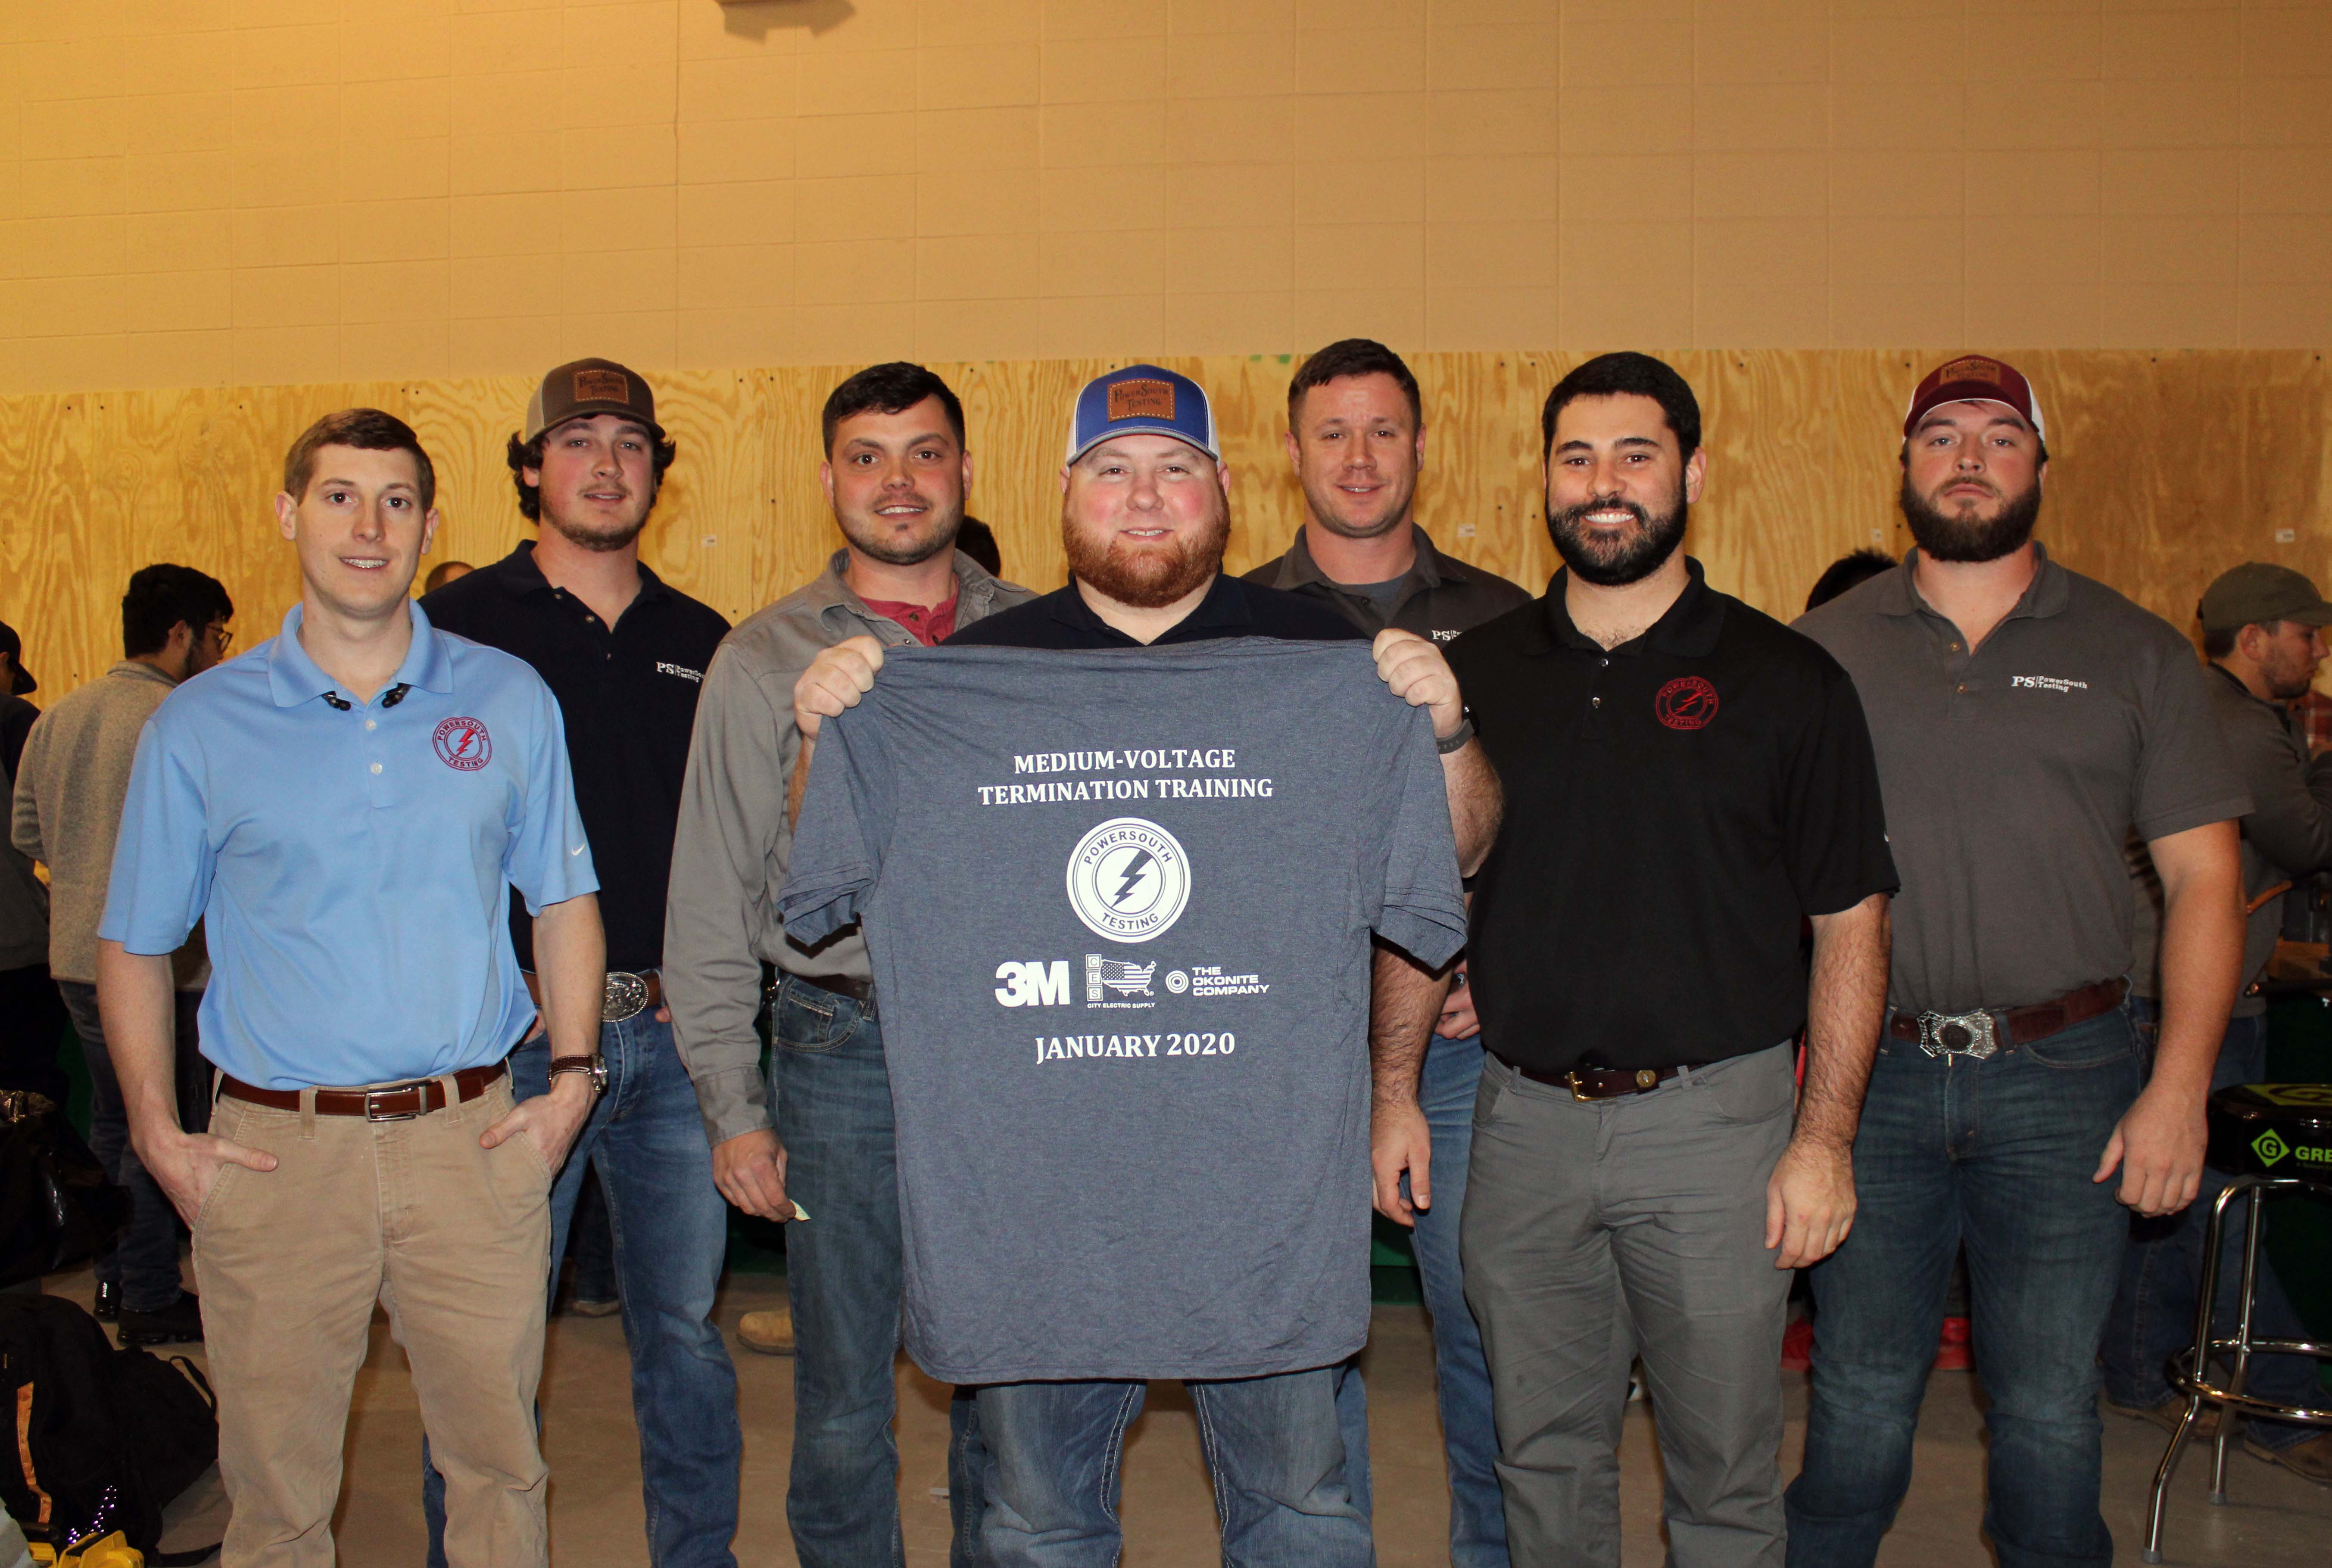 The PowerSouth Testing Team pose with the medium-voltage termination training shirt which was given to GNTC Electrical Systems Technology students after they completed six-hours of training. From left, Samuel Townsend, Logan Thomas, Billie Patnode, Layne Griffith, Colby Lackey, Lee Couth and Dreu Sams.